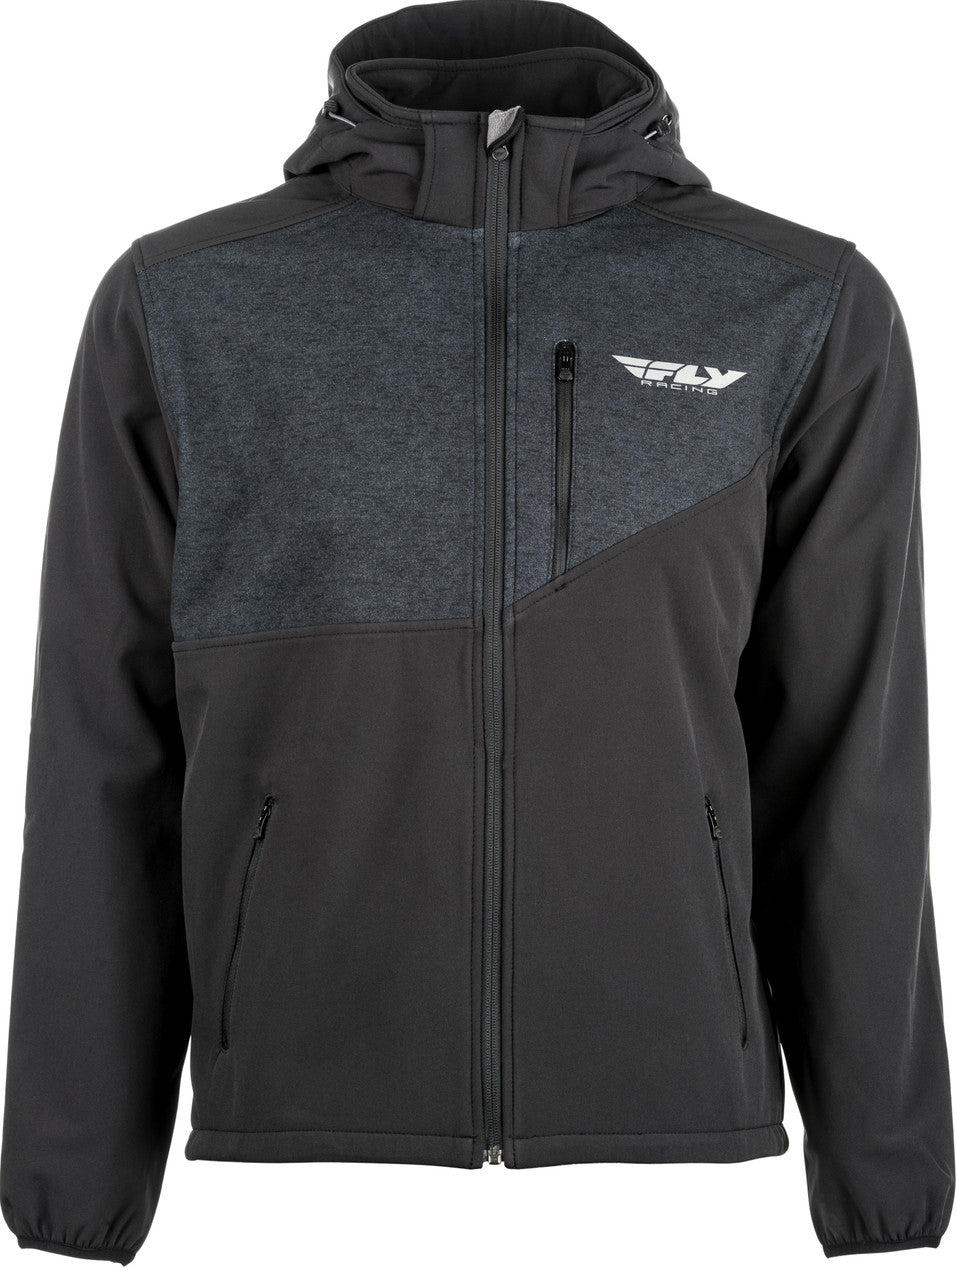 'Fly Racing' Men's Checkpoint Jacket - Black